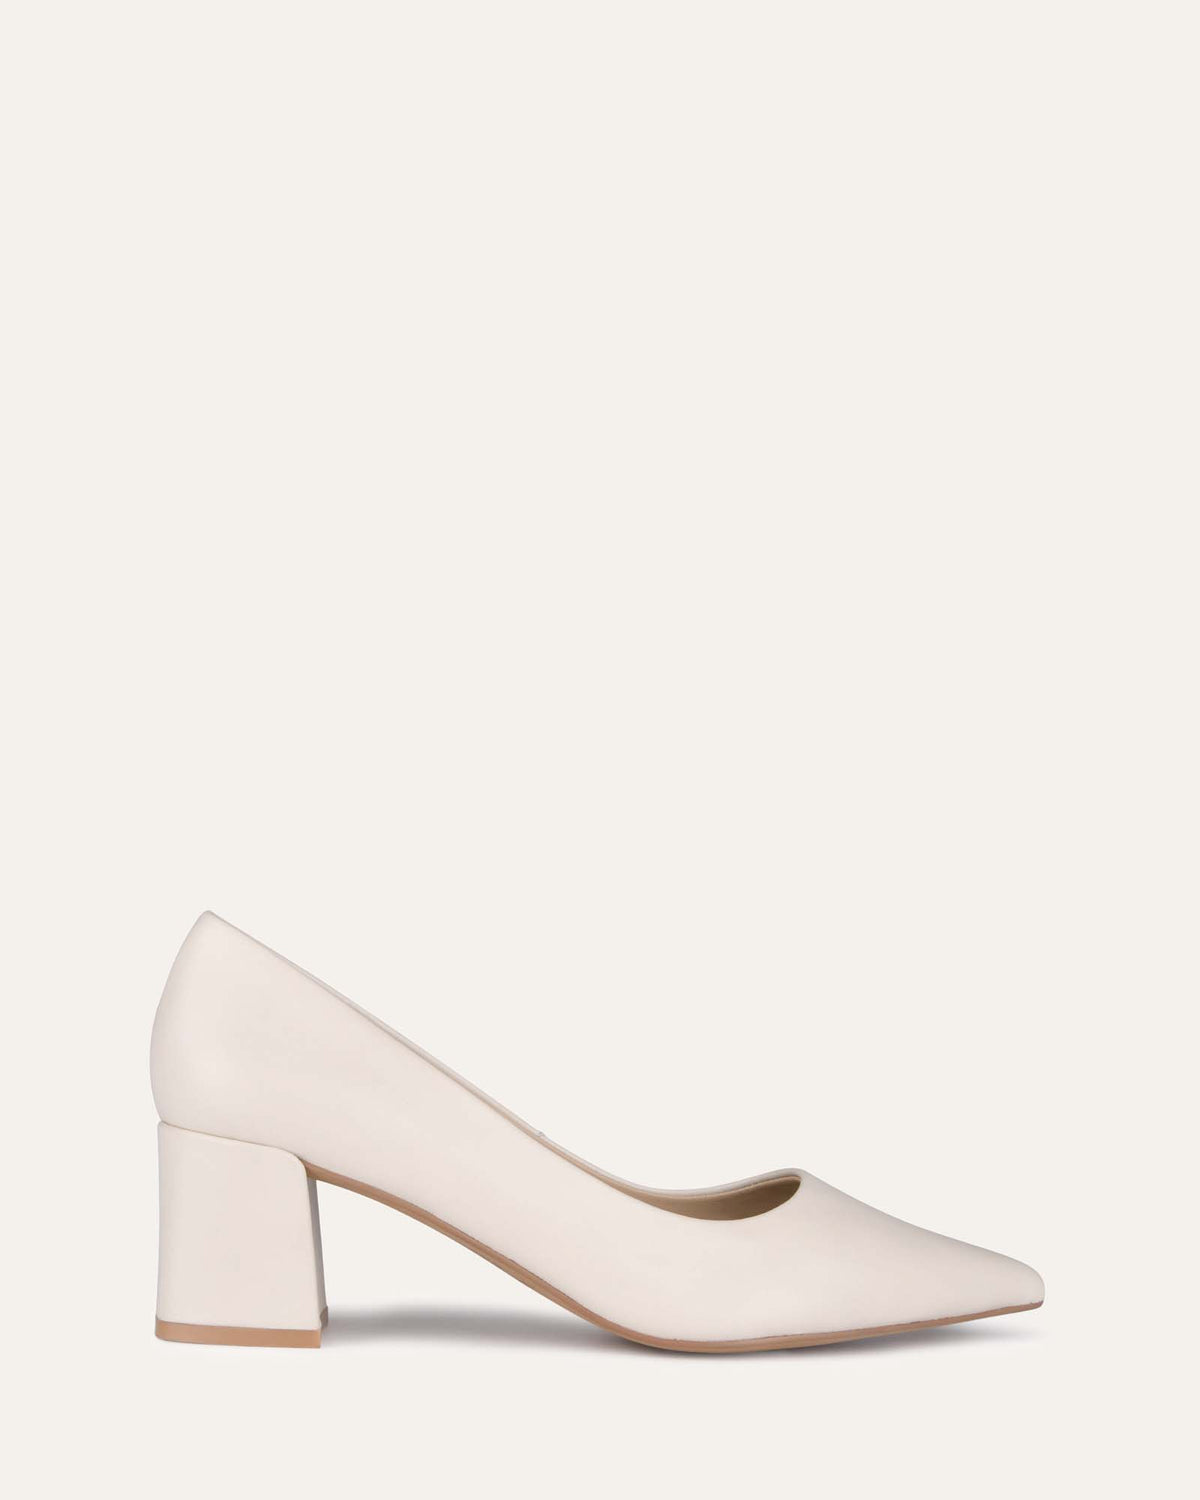 CARRINGTON LOW HEELS OFF WHITE LEATHER